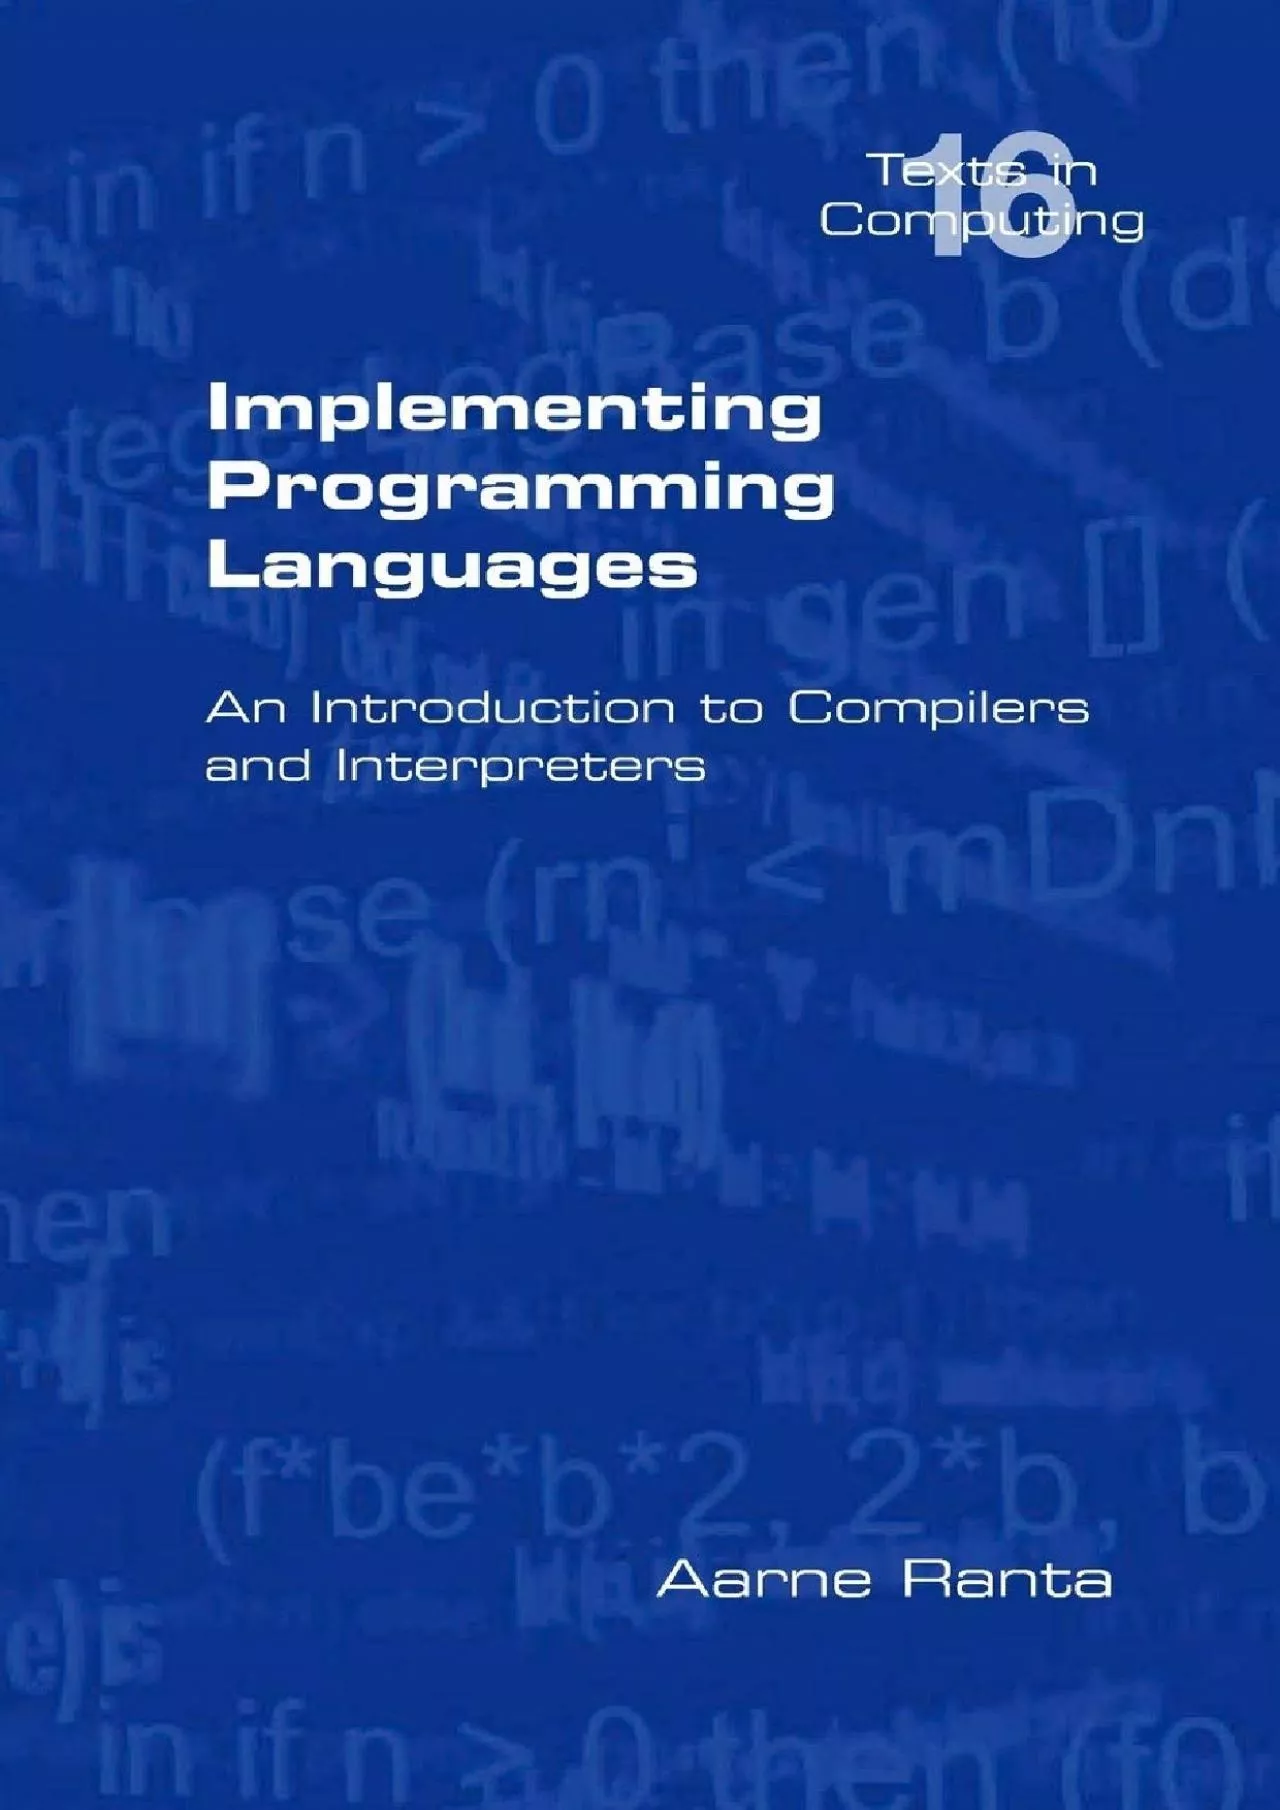 [DOWLOAD]-Implementing Programming Languages. an Introduction to Compilers and Interpreters